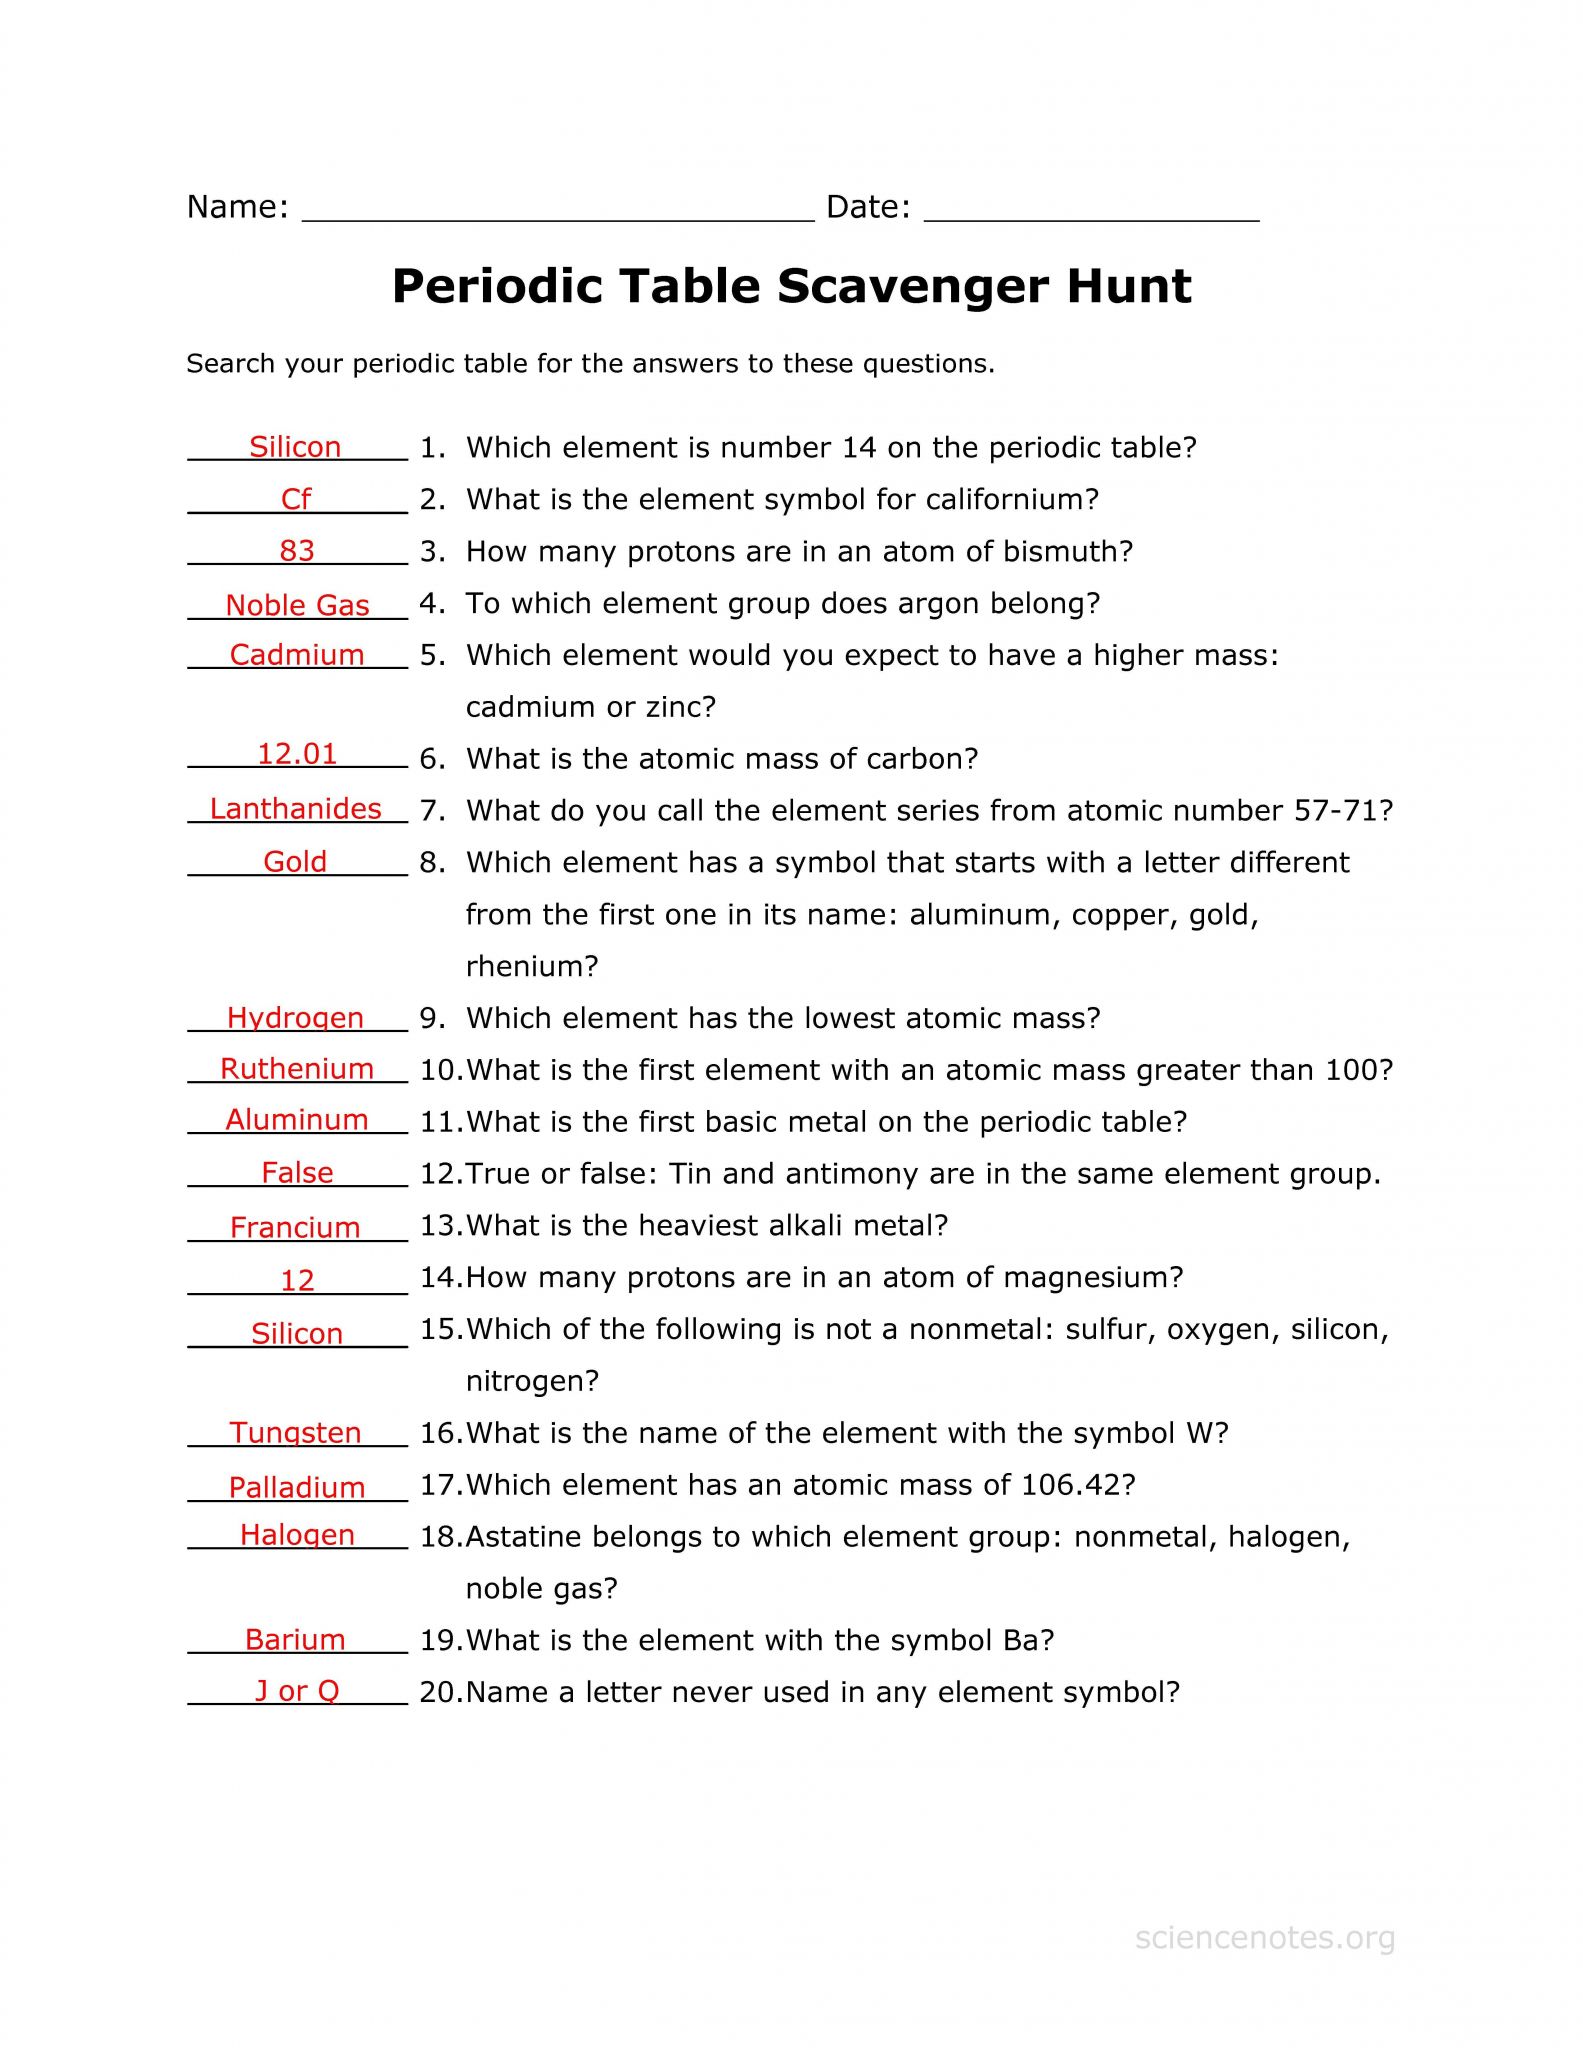 Scavenger Hunt Worksheet Also Periodic Table Youtube Videos Save Answer Key to the Periodic Table